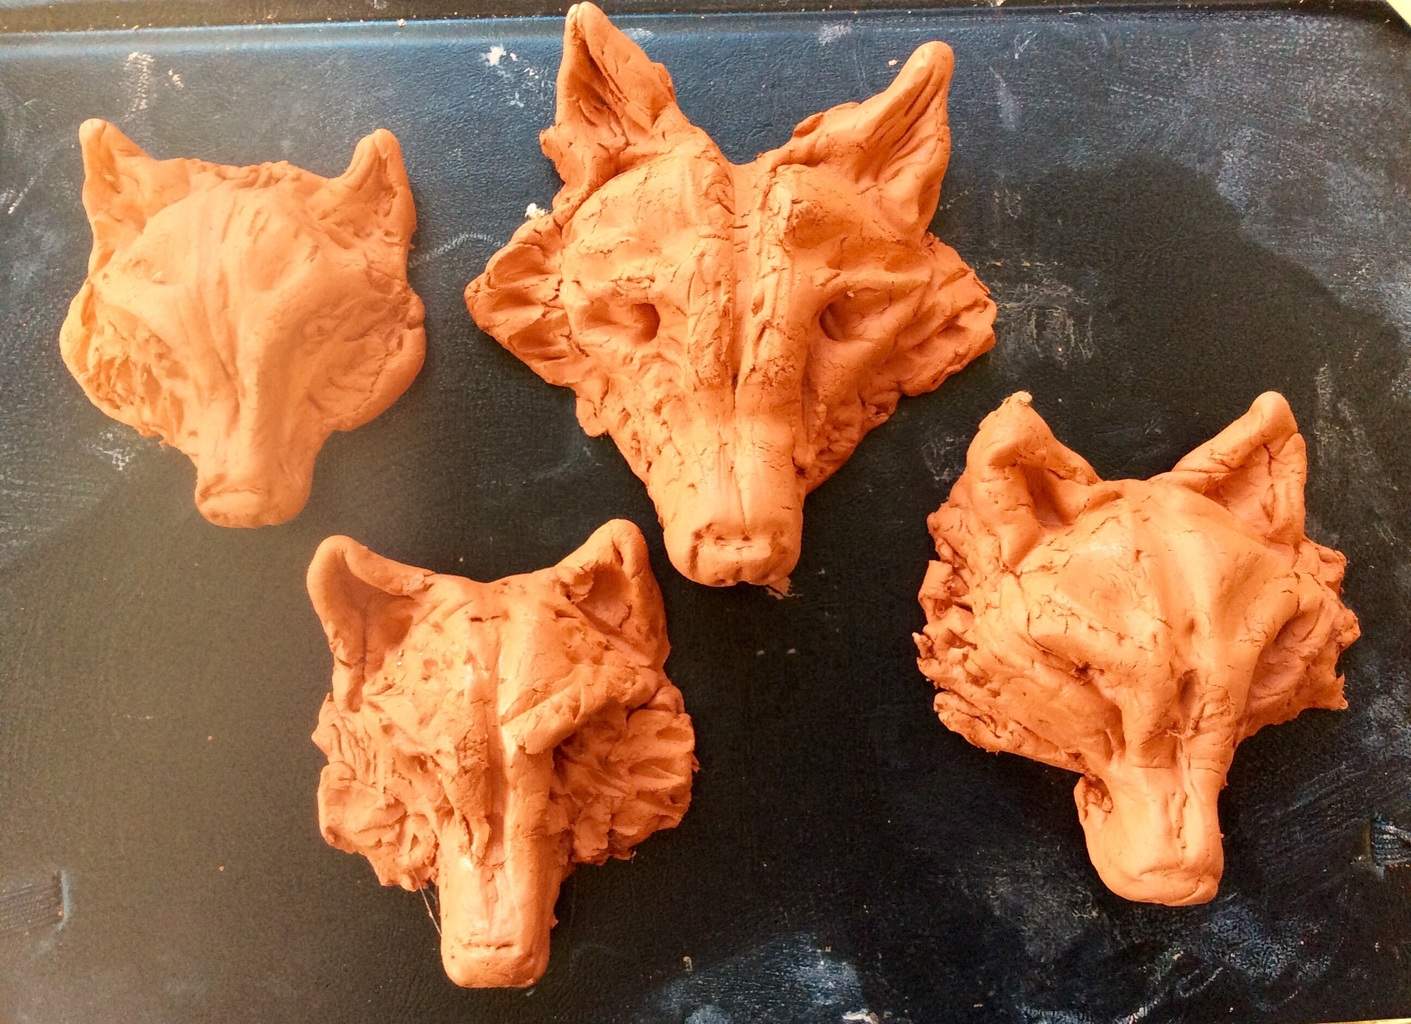 Small wolf face elplorations by Cheryle Bannon©